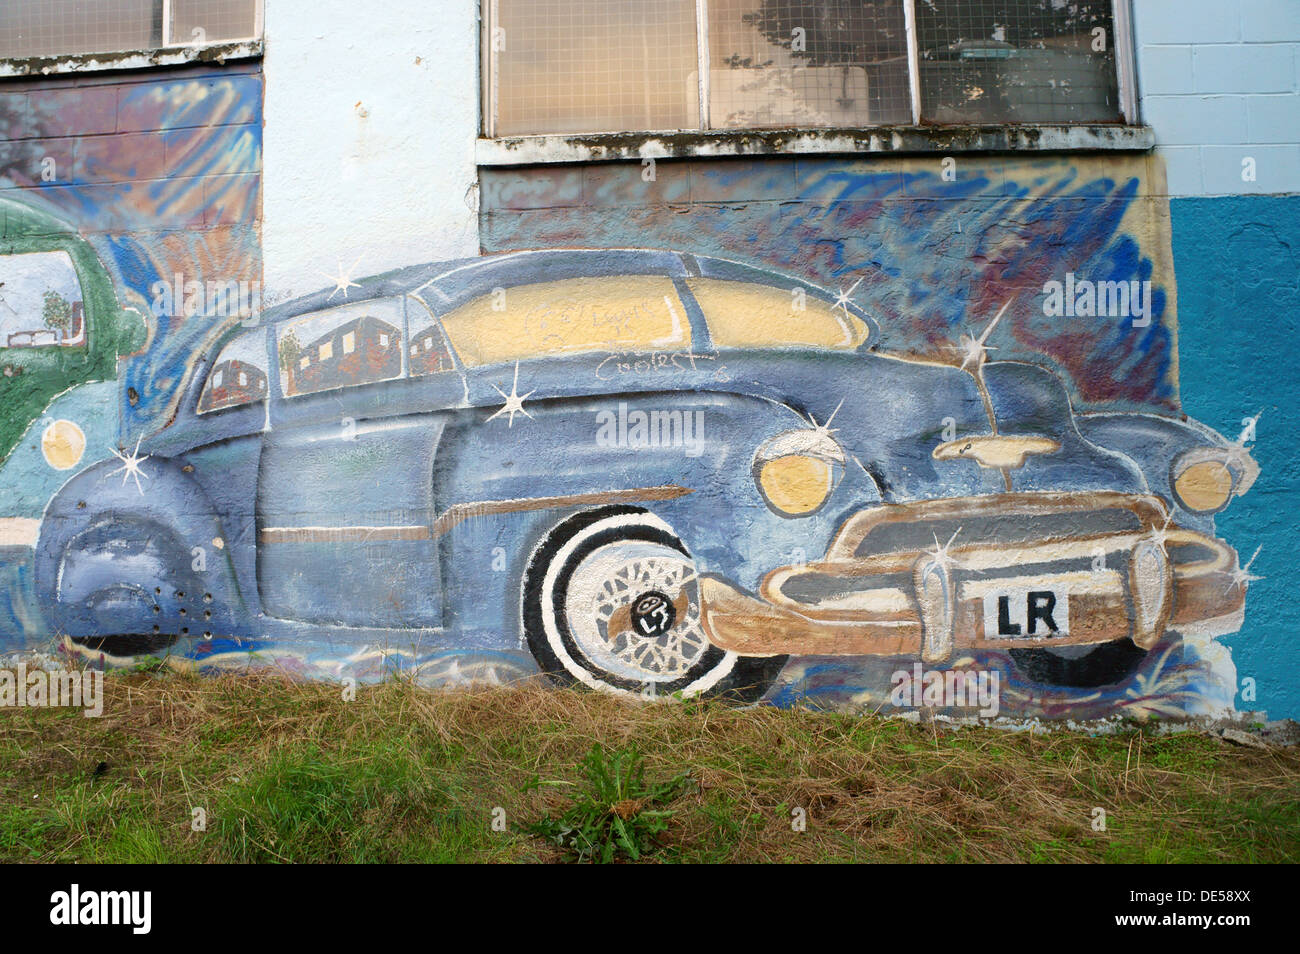 Painting of a 1940's style Chevrolet car on the wall of an automobile garage, Commercial Drive, Vancouver, Canada Stock Photo